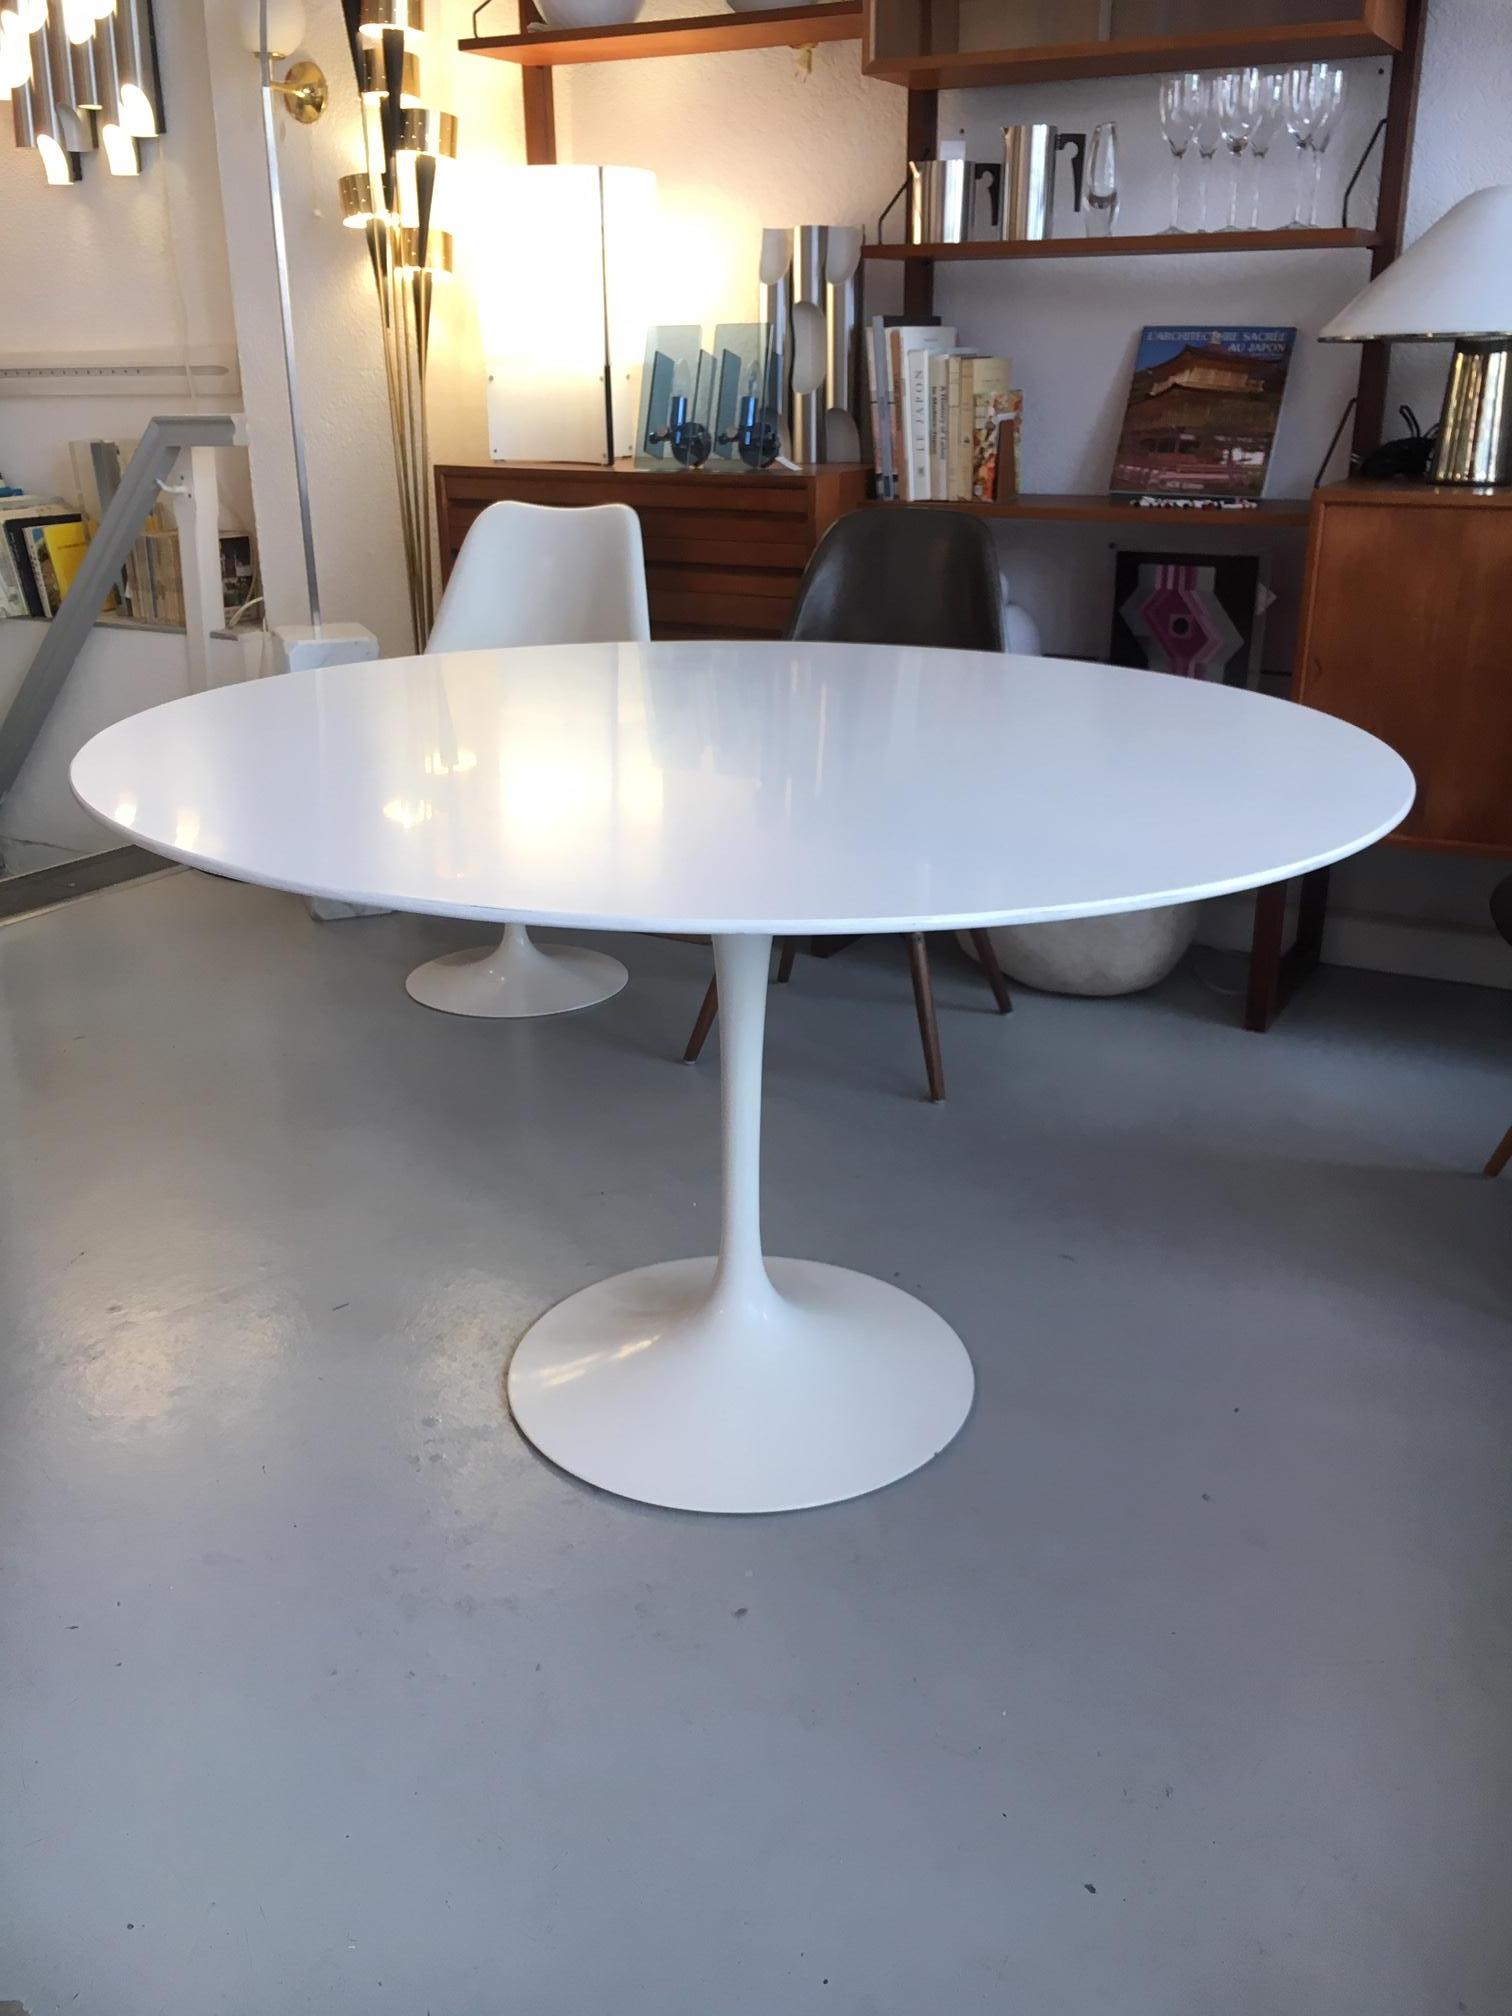 Eero Saarinen White Laminate Tulip Dining table by Knoll Switzerland, circa 1970.

Saarinen began studies in sculpture at the Académie de la Grande Chaumière in Paris, France. He then went on to study at the Yale School of Architecture, completing